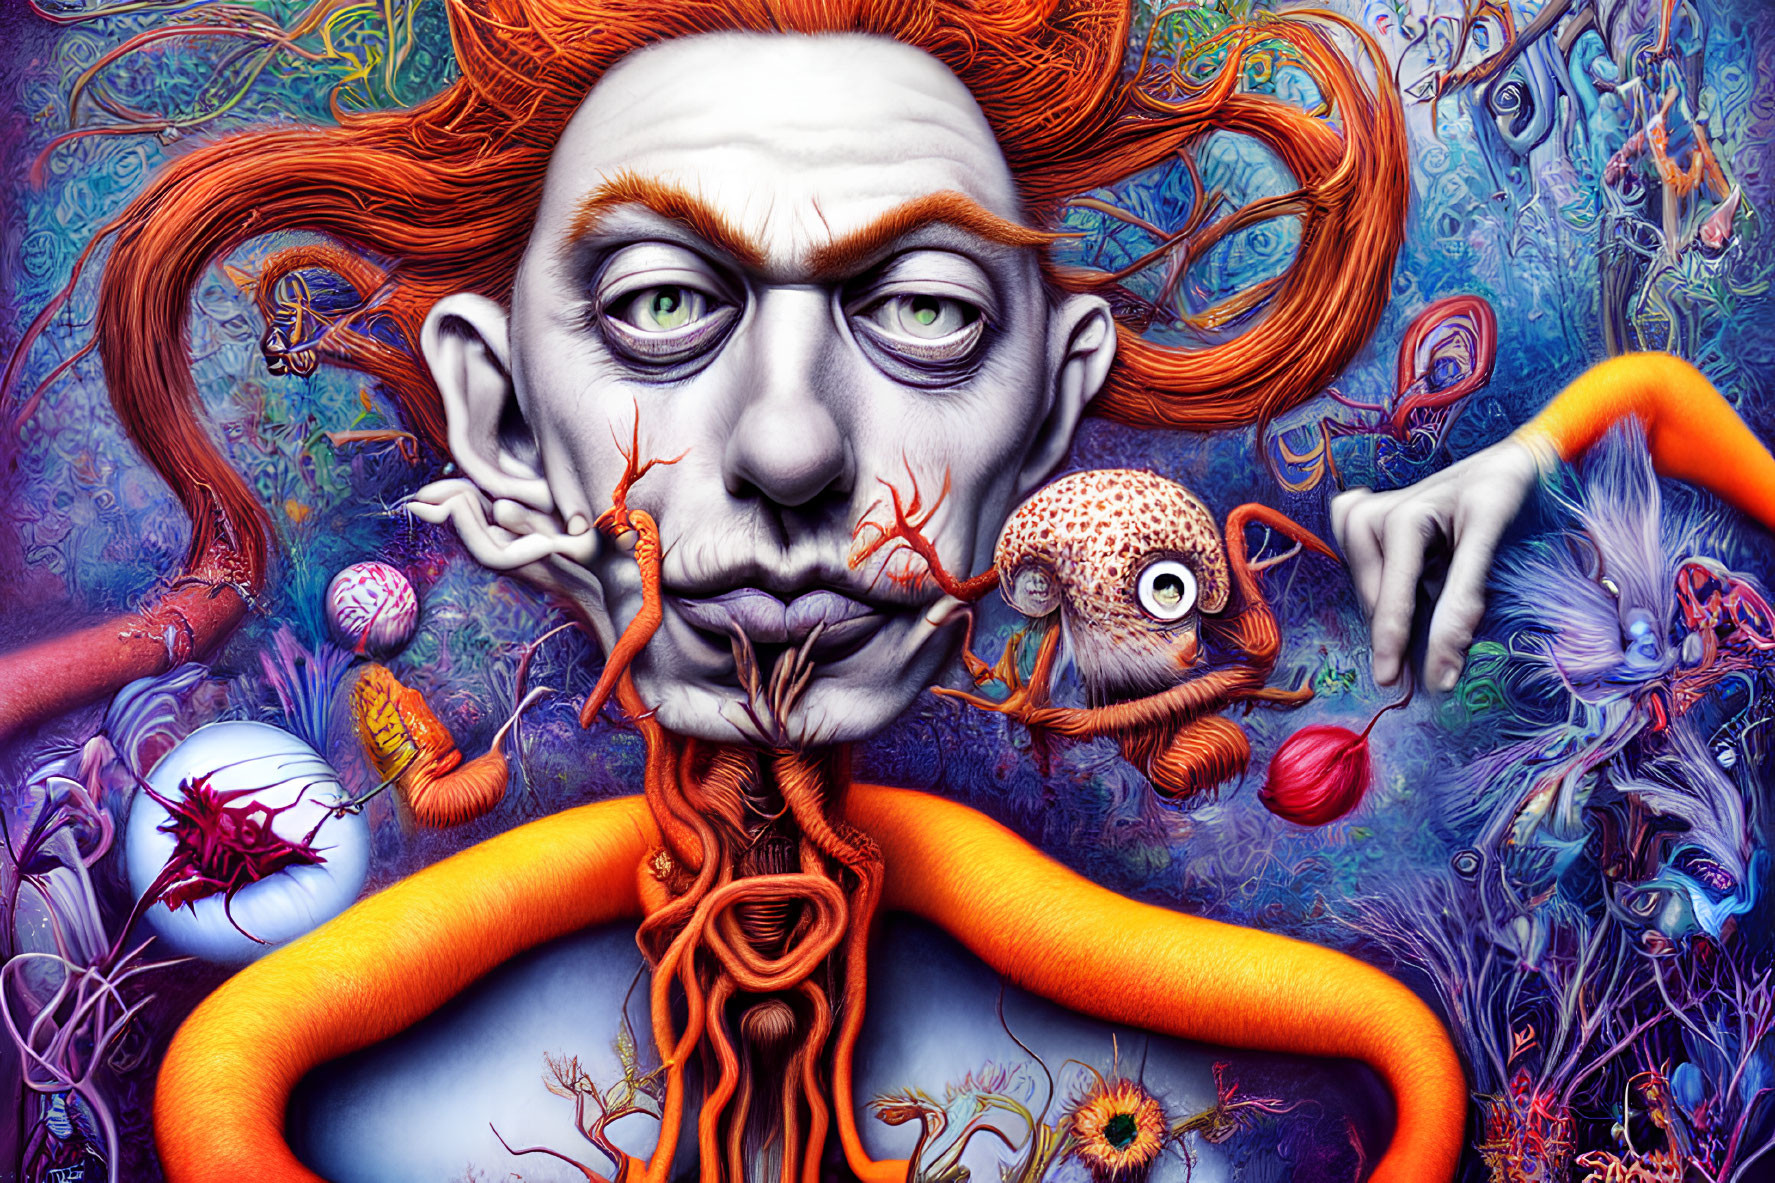 Surreal artwork: orange-haired character with pale skin & fantastical creatures